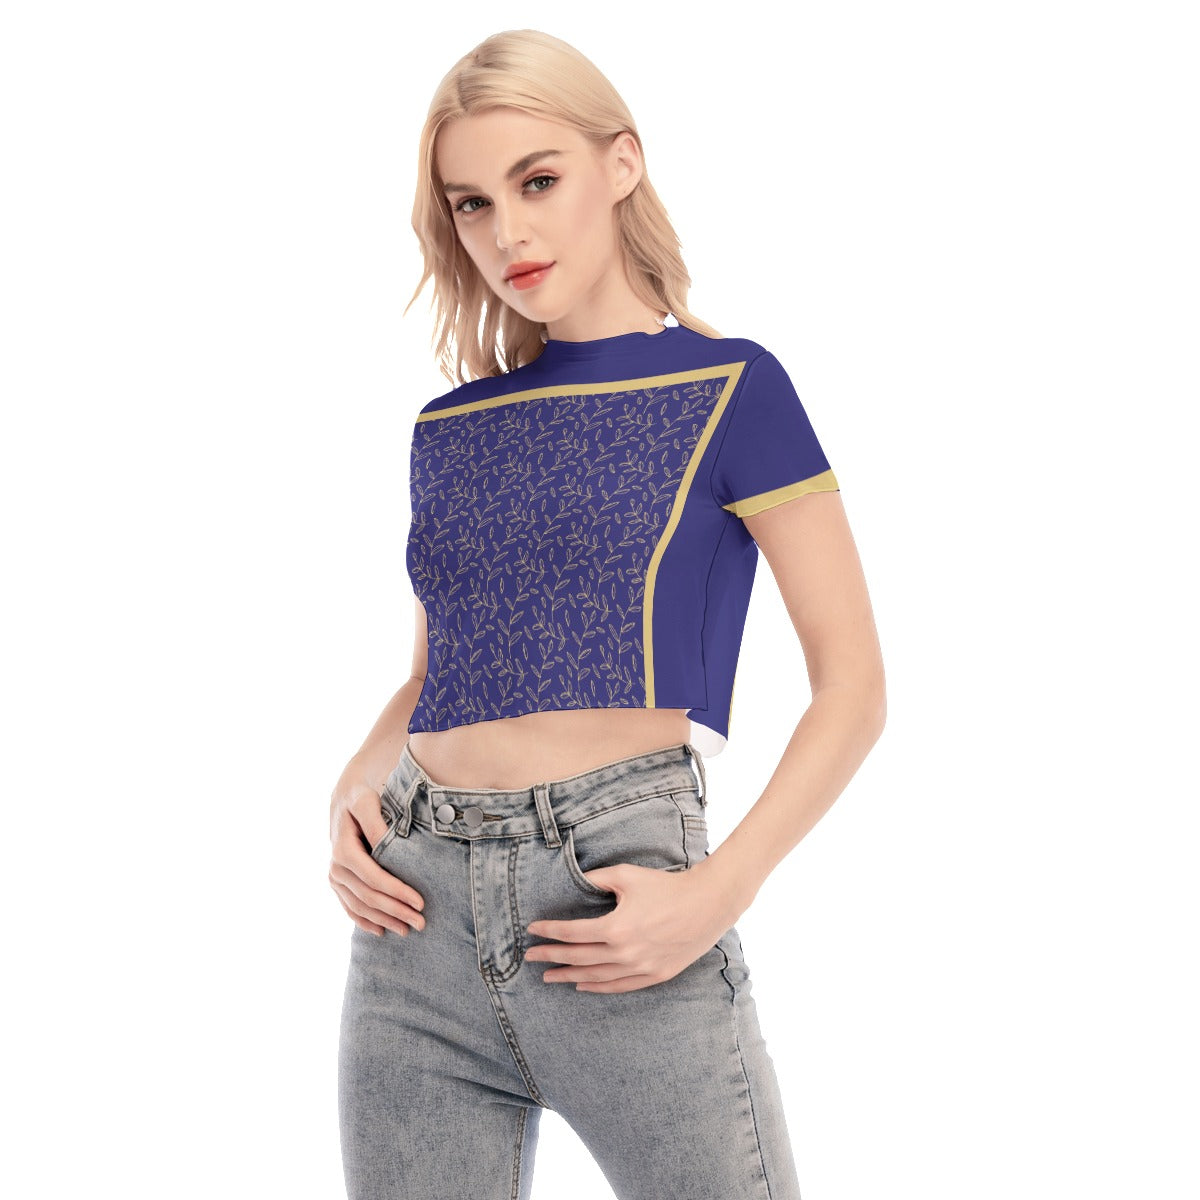 Super Bloom Collection Women's Short Sleeves Mesh Crop Top. Pattern hand-painted by the Designer Maria Alejandra Echenique